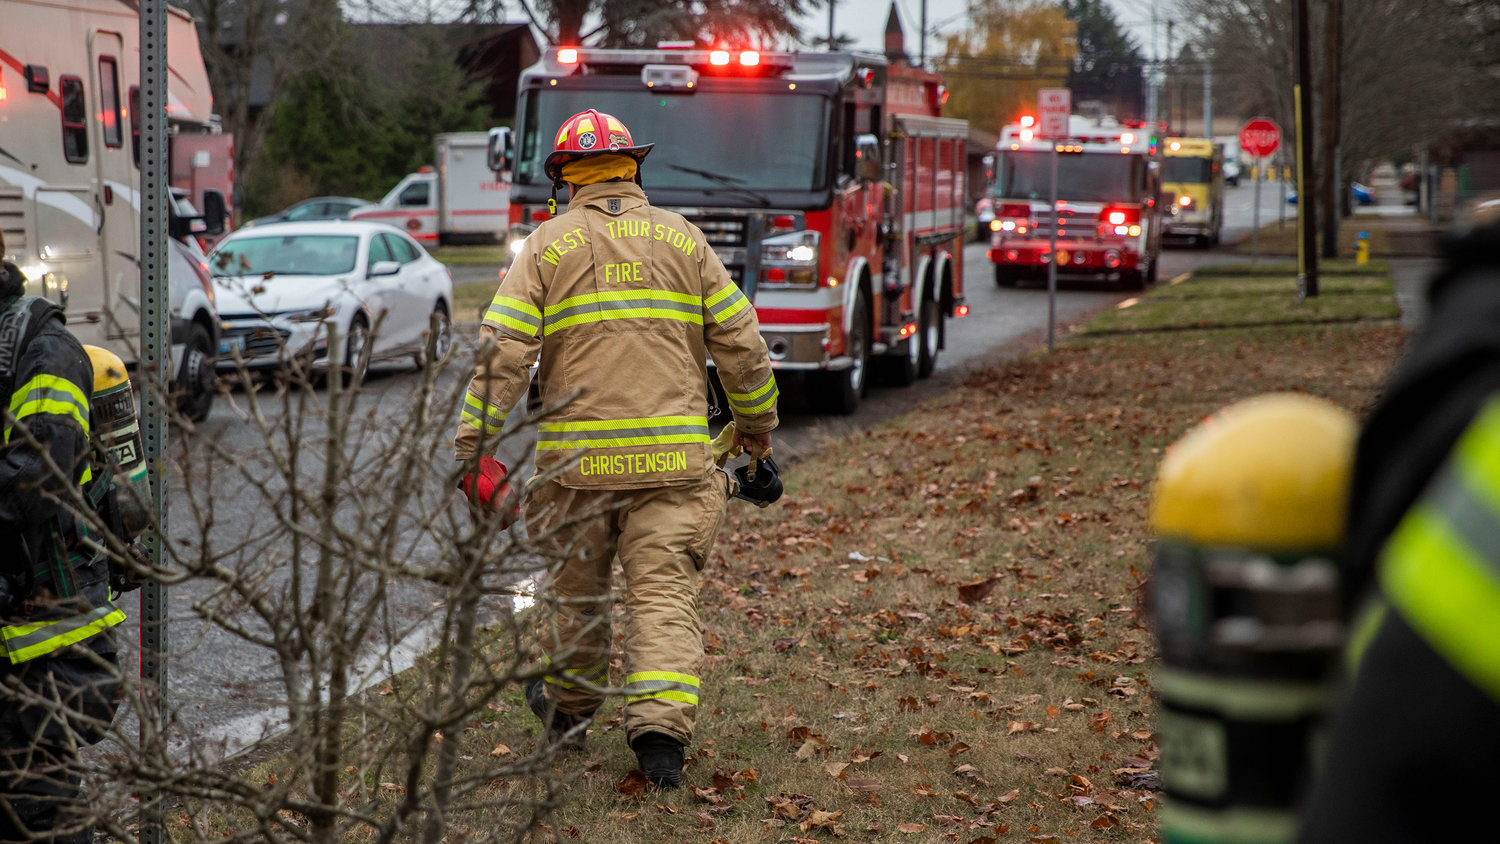 West Thurston Fire responds to the scene of a residential fire in the 200 block of North Rock Street in Centralia on Friday.